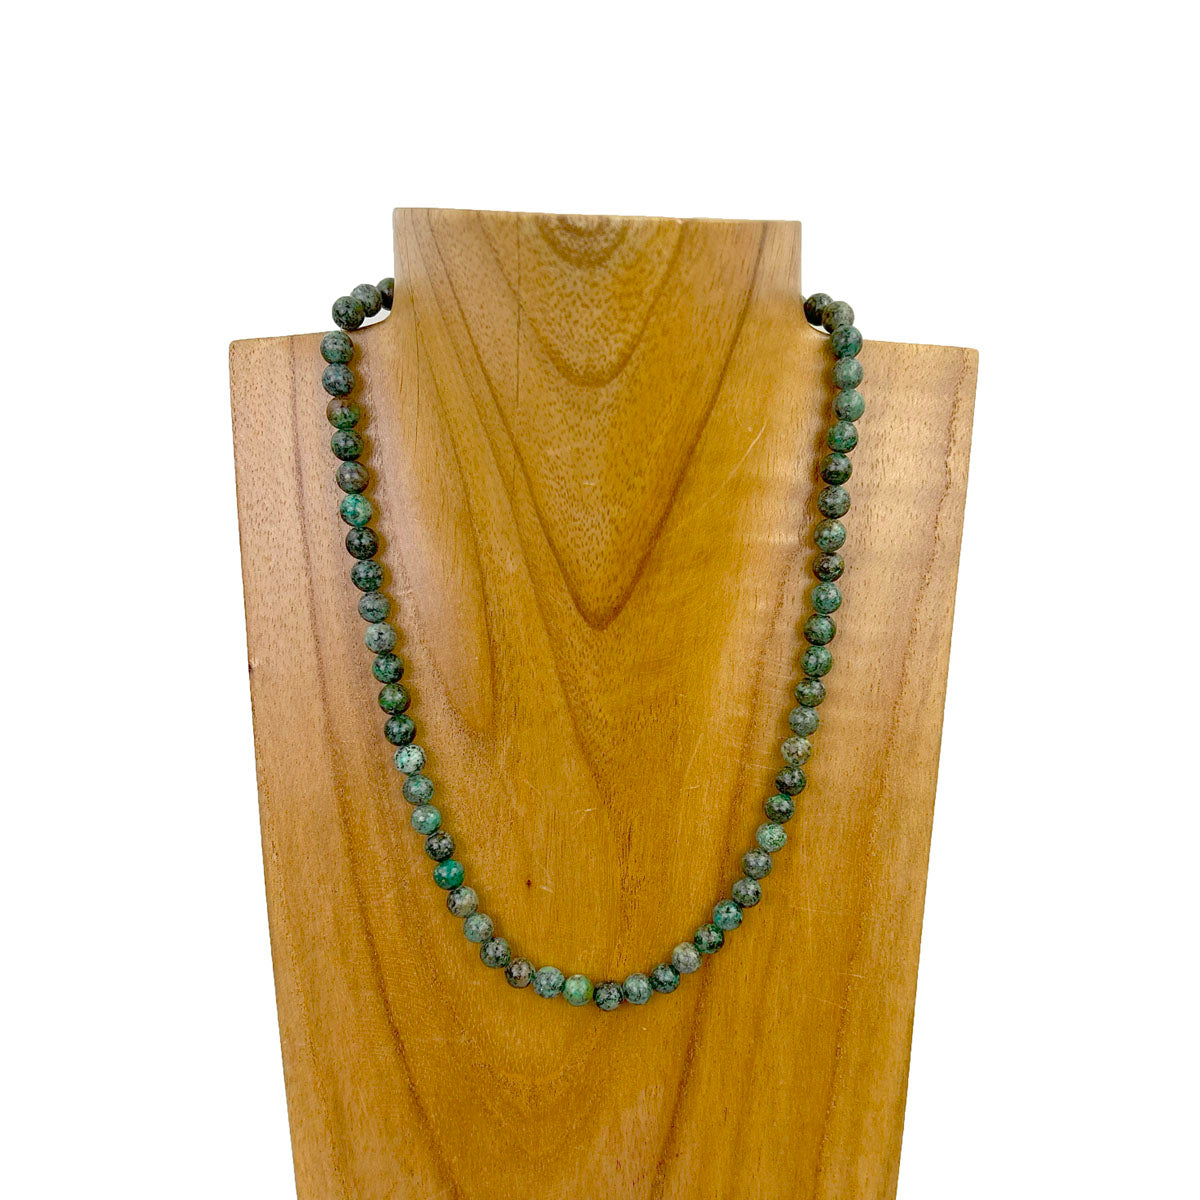 NKZ231115-81                                 16 inches round dark green turquoise stone beads Necklace